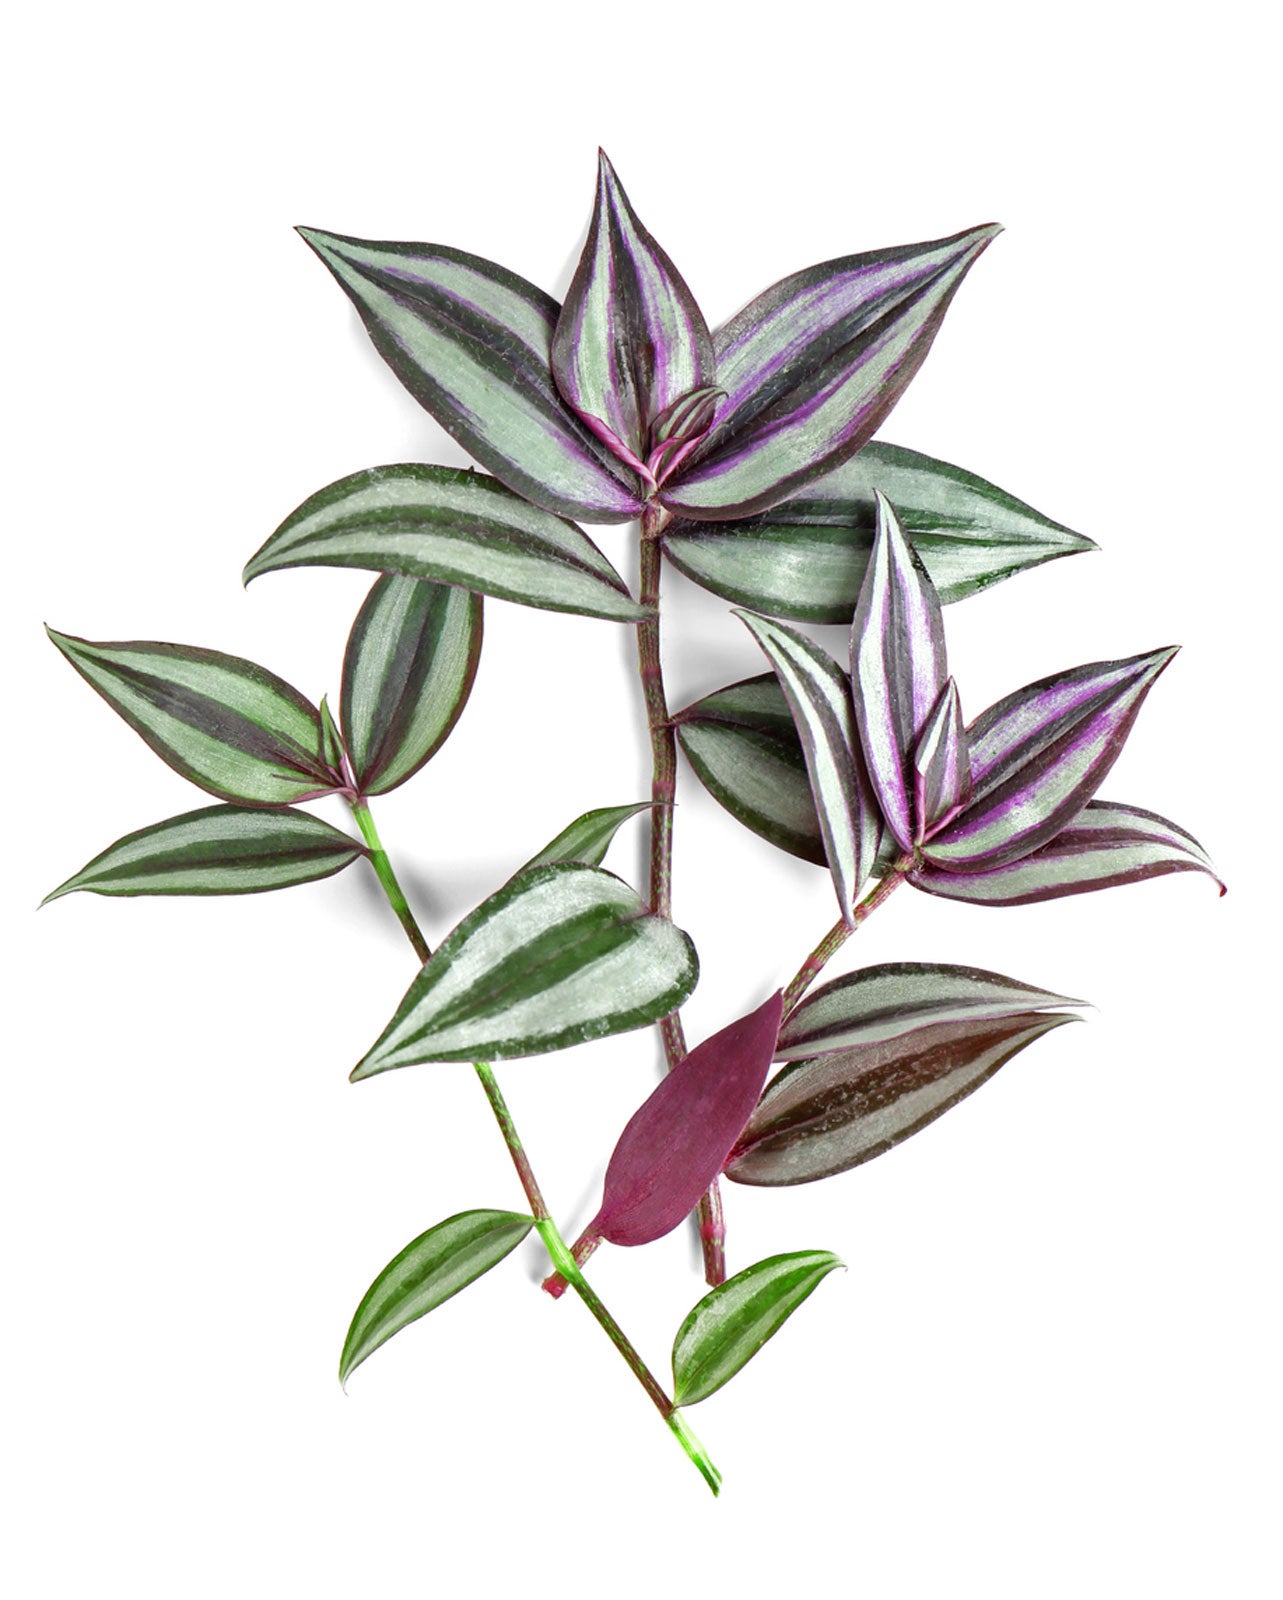 3 pcs Wandering Jew  Cuttings House Plant 5-6 inches each